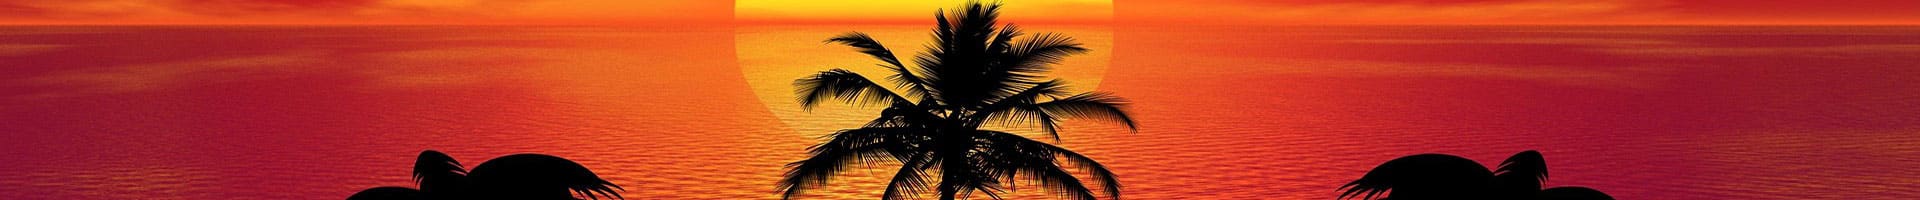 Header image of palm leaves at sunset